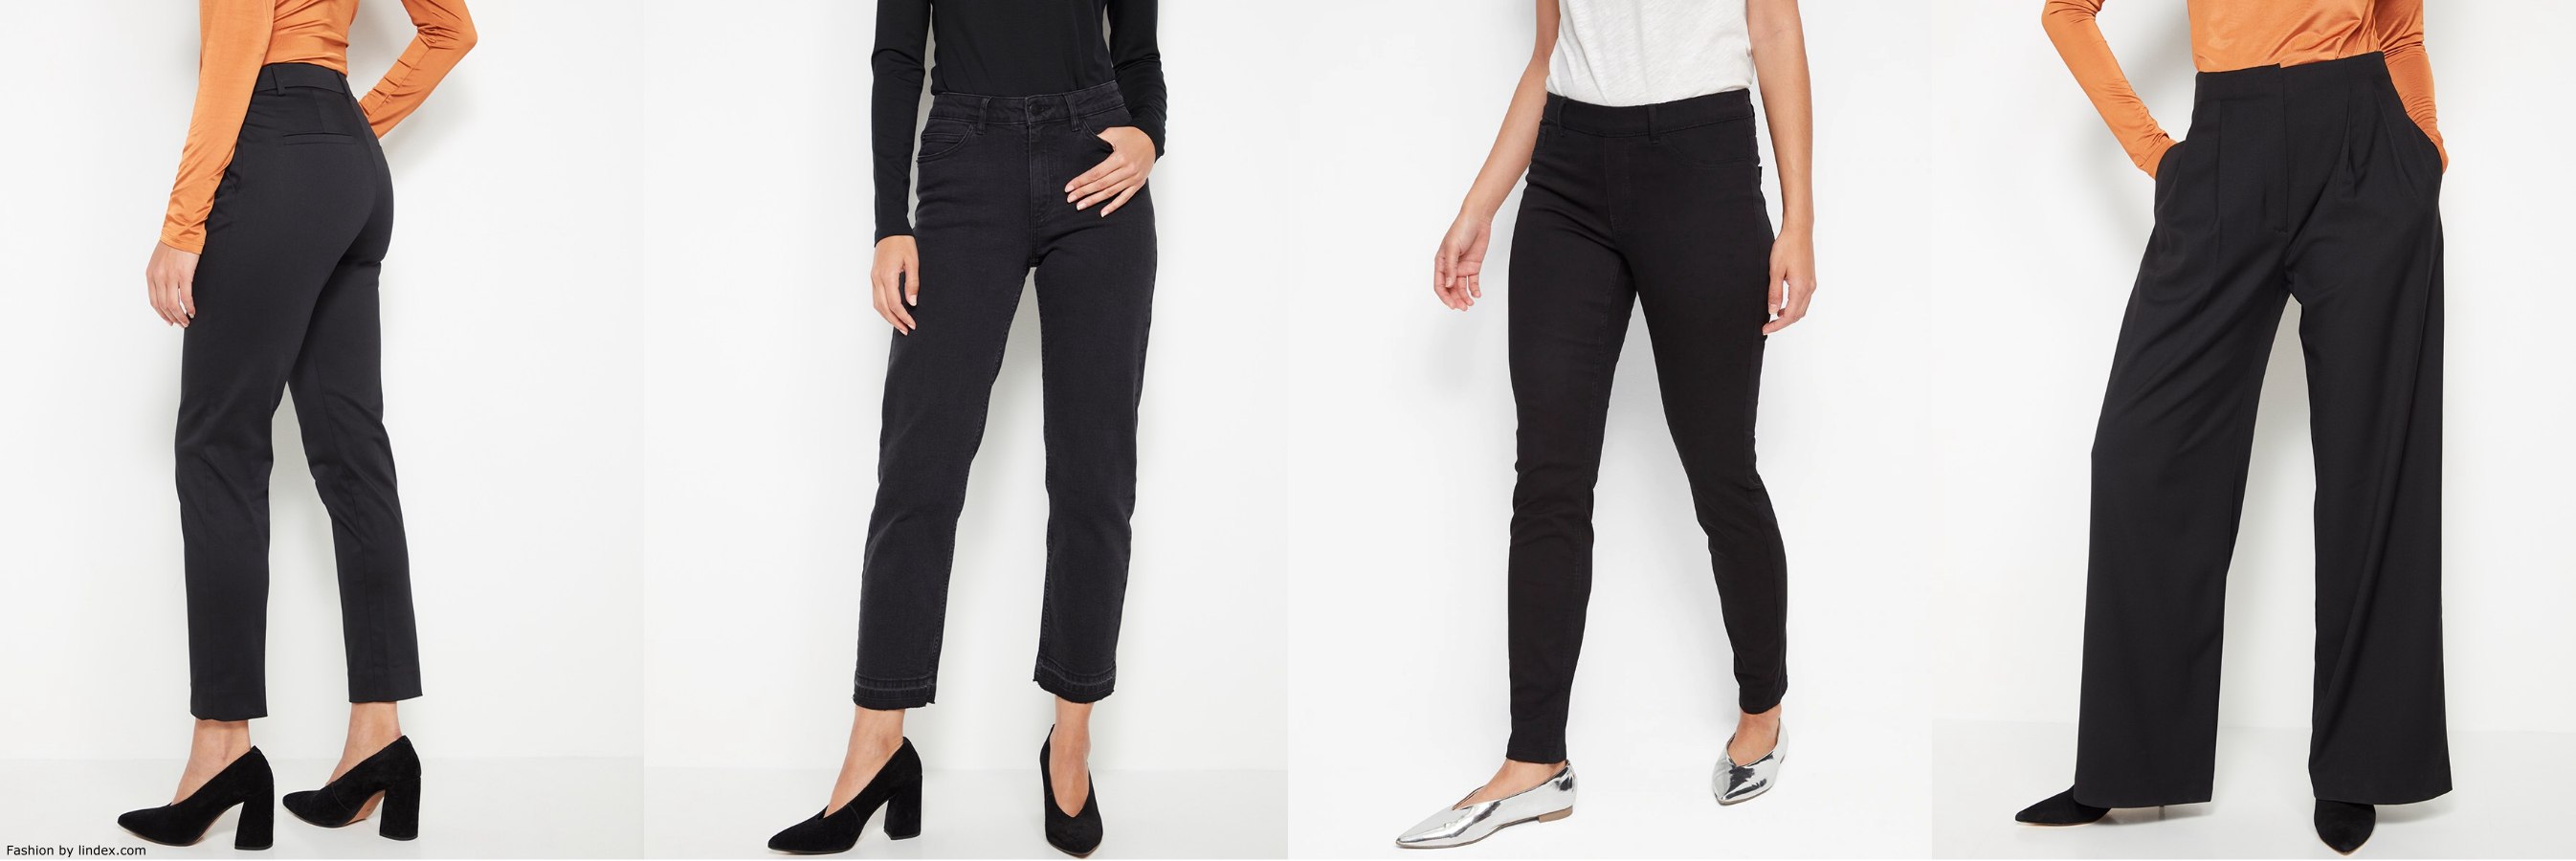 Classic black pants worn the right way and black leggings, casuals ...